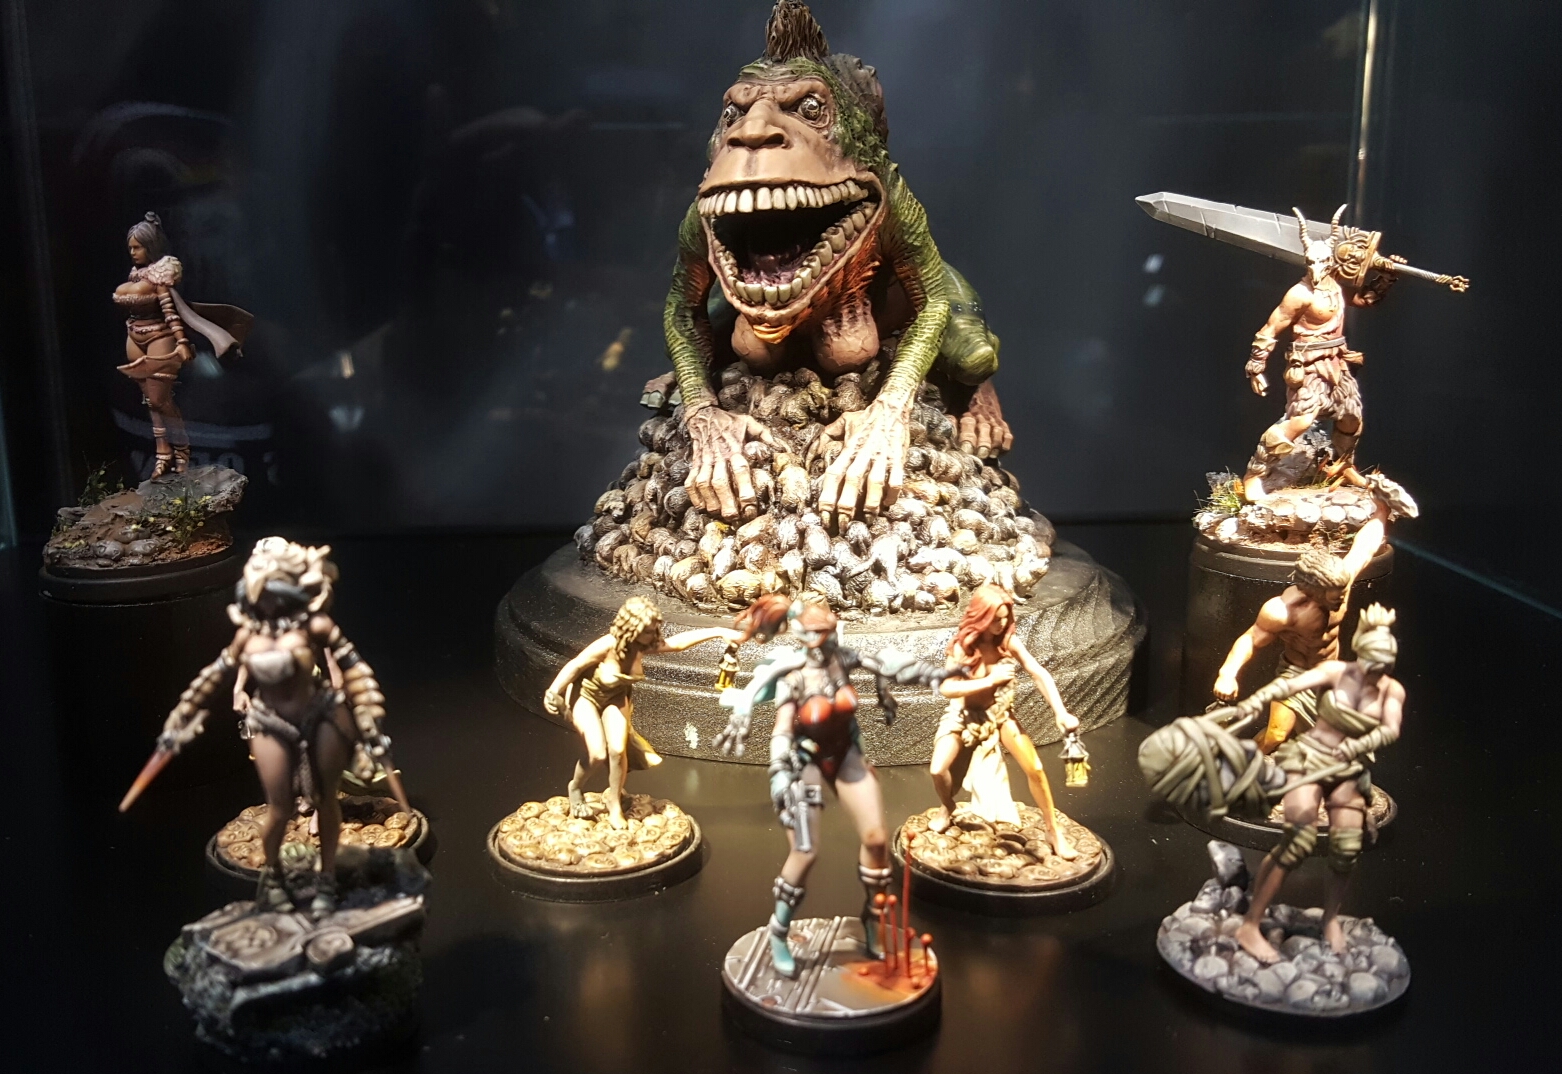 Still More Kingdom Death Miniatures Ontabletop Home Of Beasts